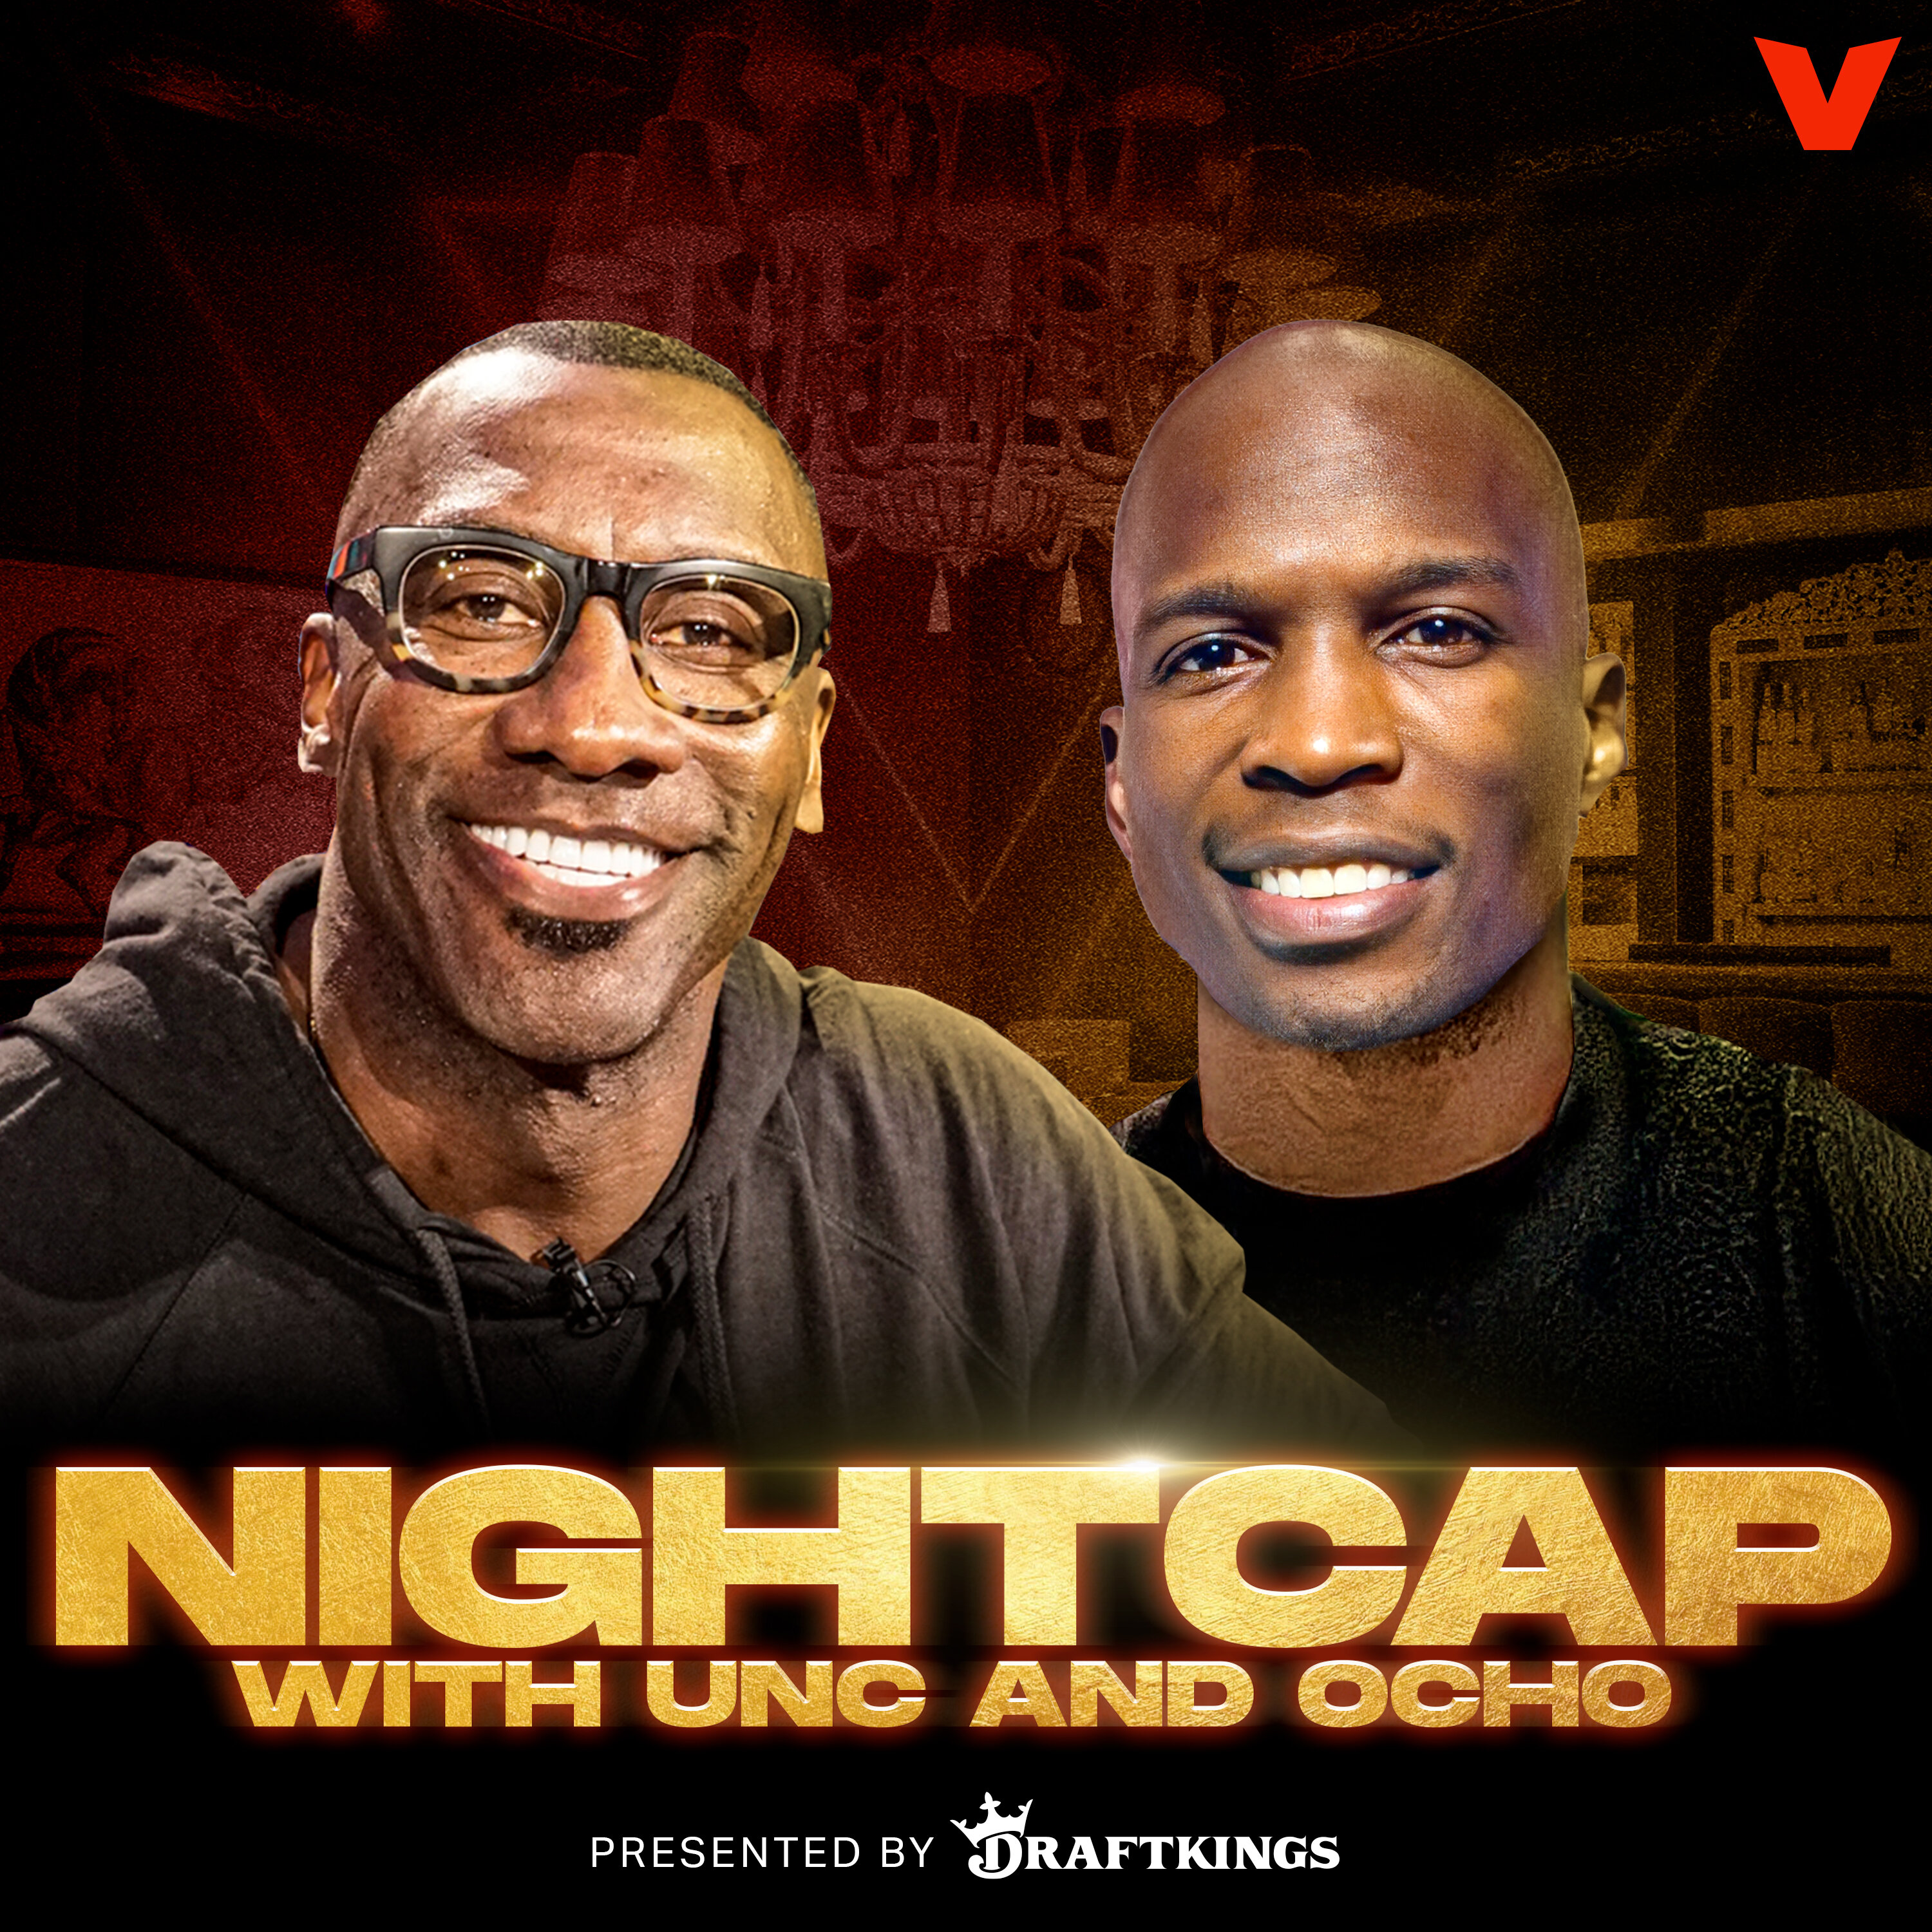 Nightcap - A Zach Wilson Debate & What's Wrong With the Bengals